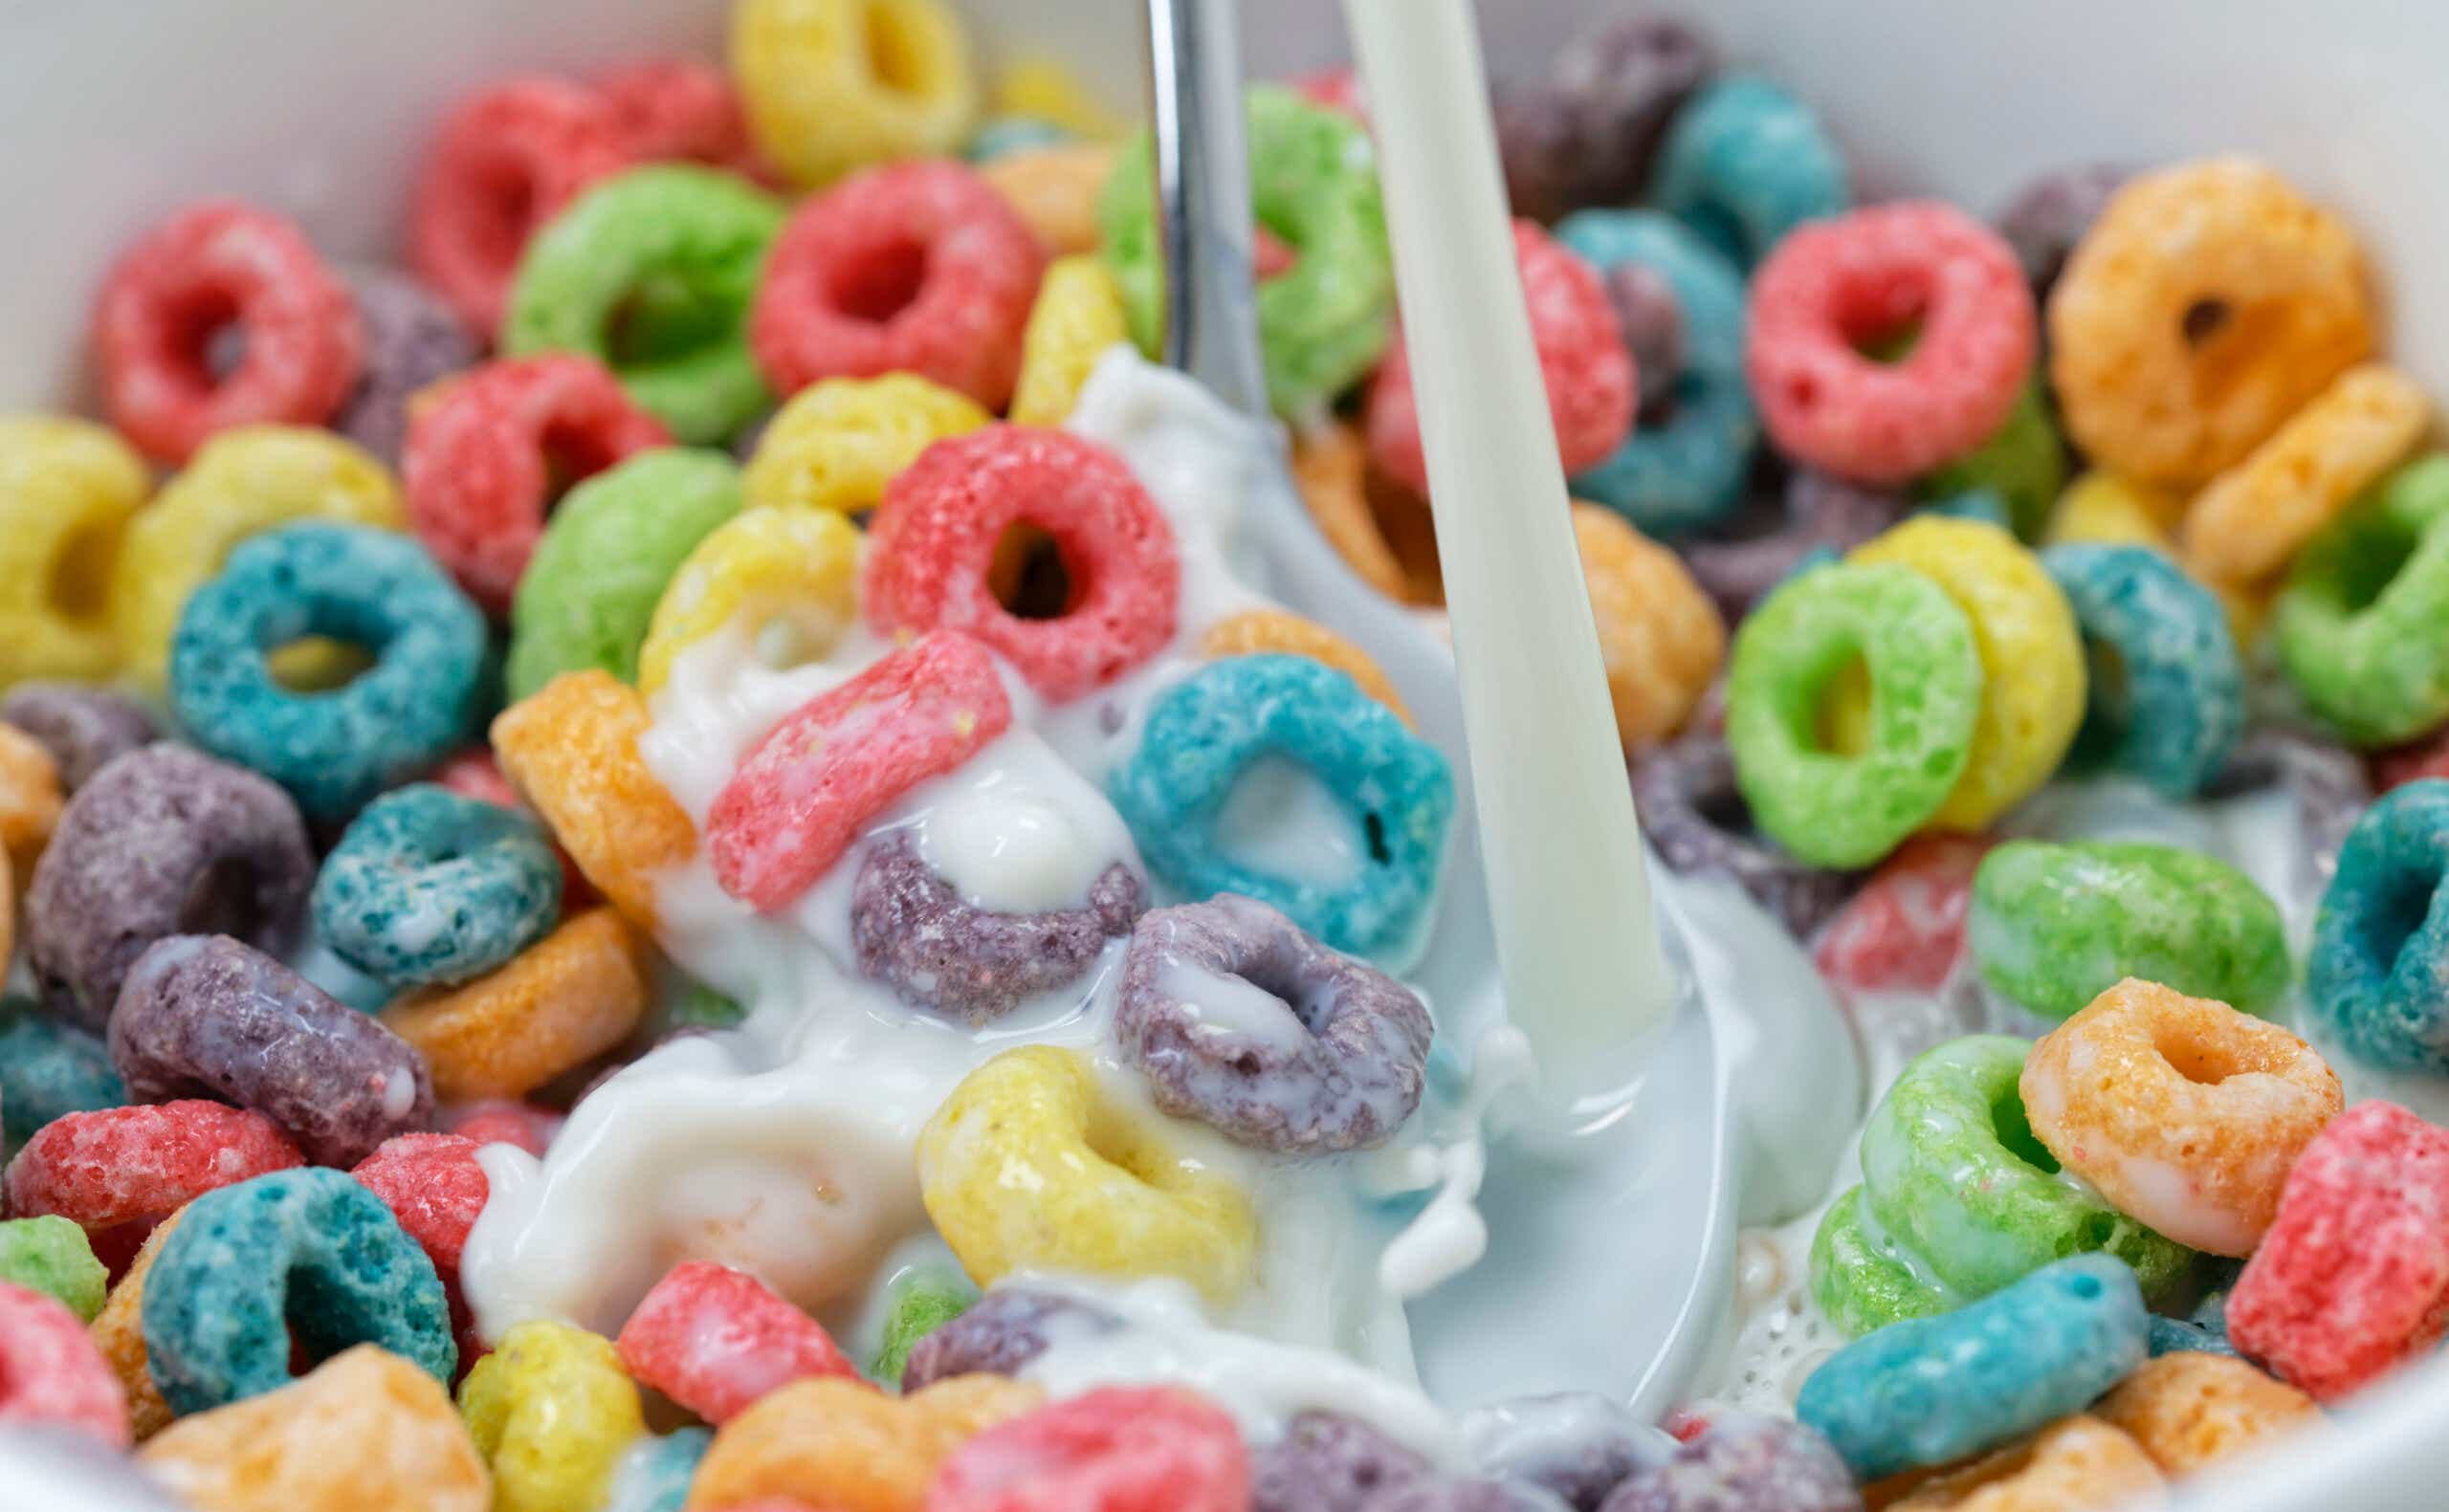 Milk being poured into a bowl of colorful fruit cereal